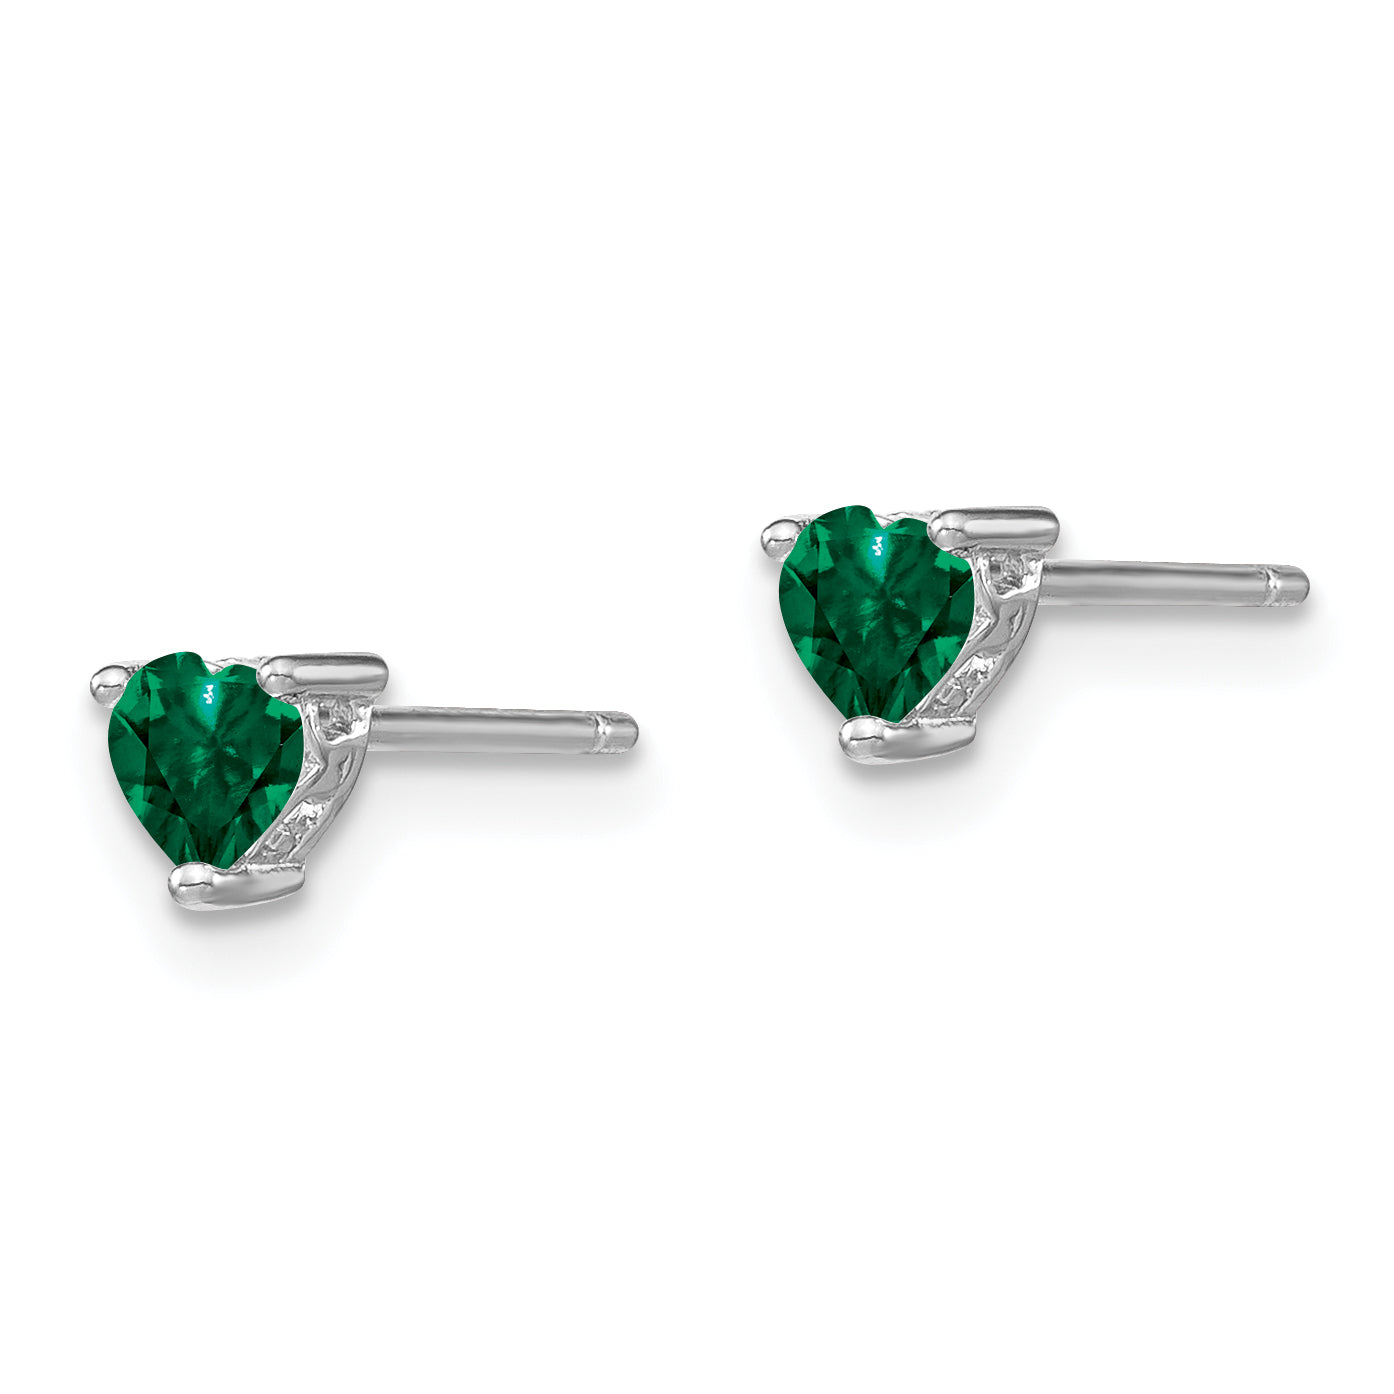 Sterling Silver Rhod-plated 4mm Heart Created Emerald Post Earrings